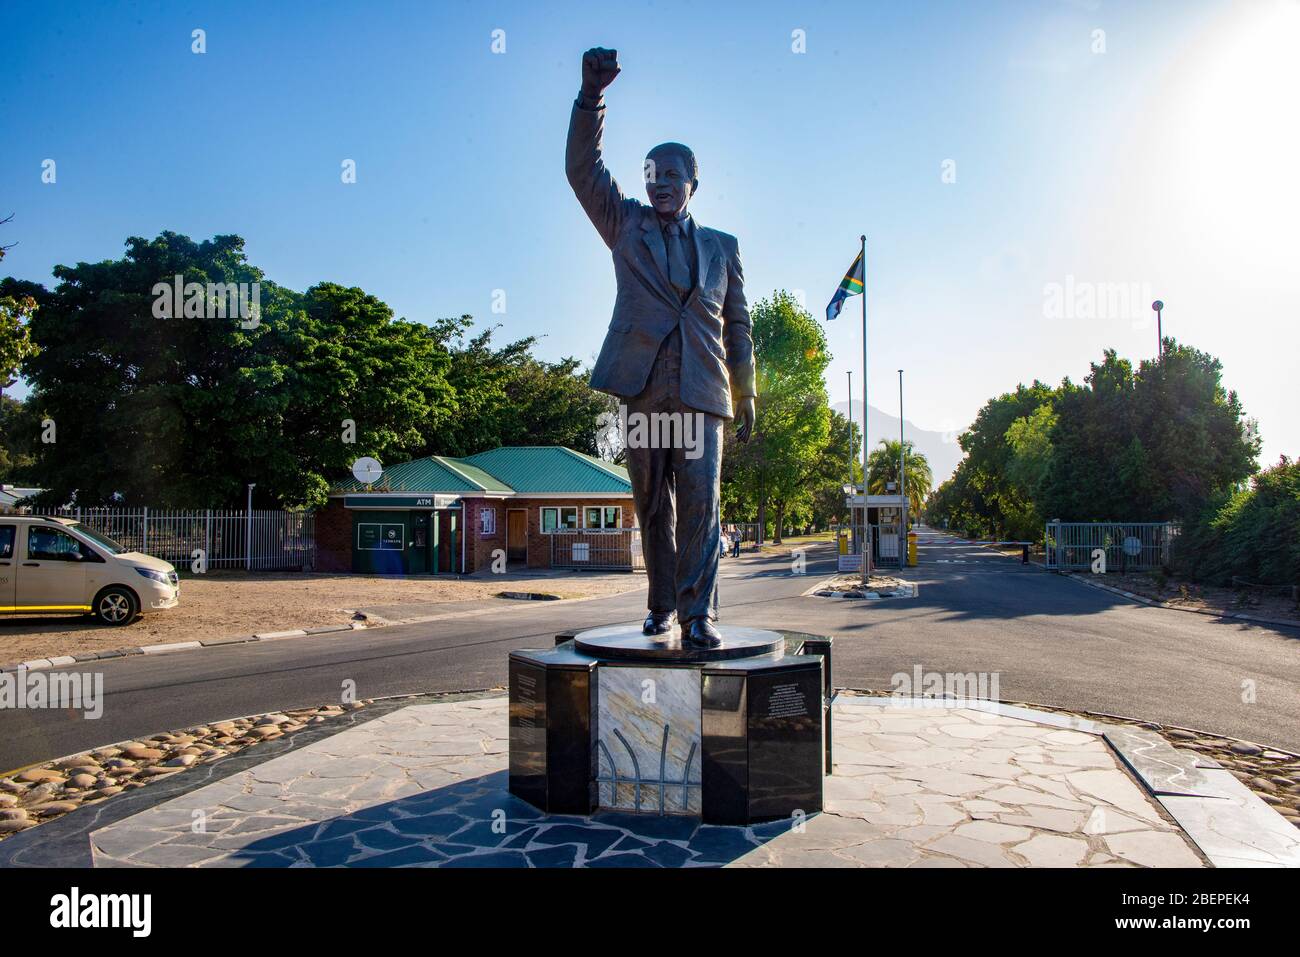 The Long Walk To Freedom Statue outside the Drakenstein Correctional Centre (formerly Victor Verster Prison). It was at these gates where on 11 February 1990, the day of his release, he was met with a jubilant crowd and news agencies from all over the world.  The statue was unveiled in August 2008 in the presence of Mandela on the occasion of his 90th birthday. It is a low-security prison between Paarl and Franschhoek, on the R301 road 5 km from the R45 Huguenot Road, in the valley of the Dwars River in the Western Cape of South Africa. Stock Photo